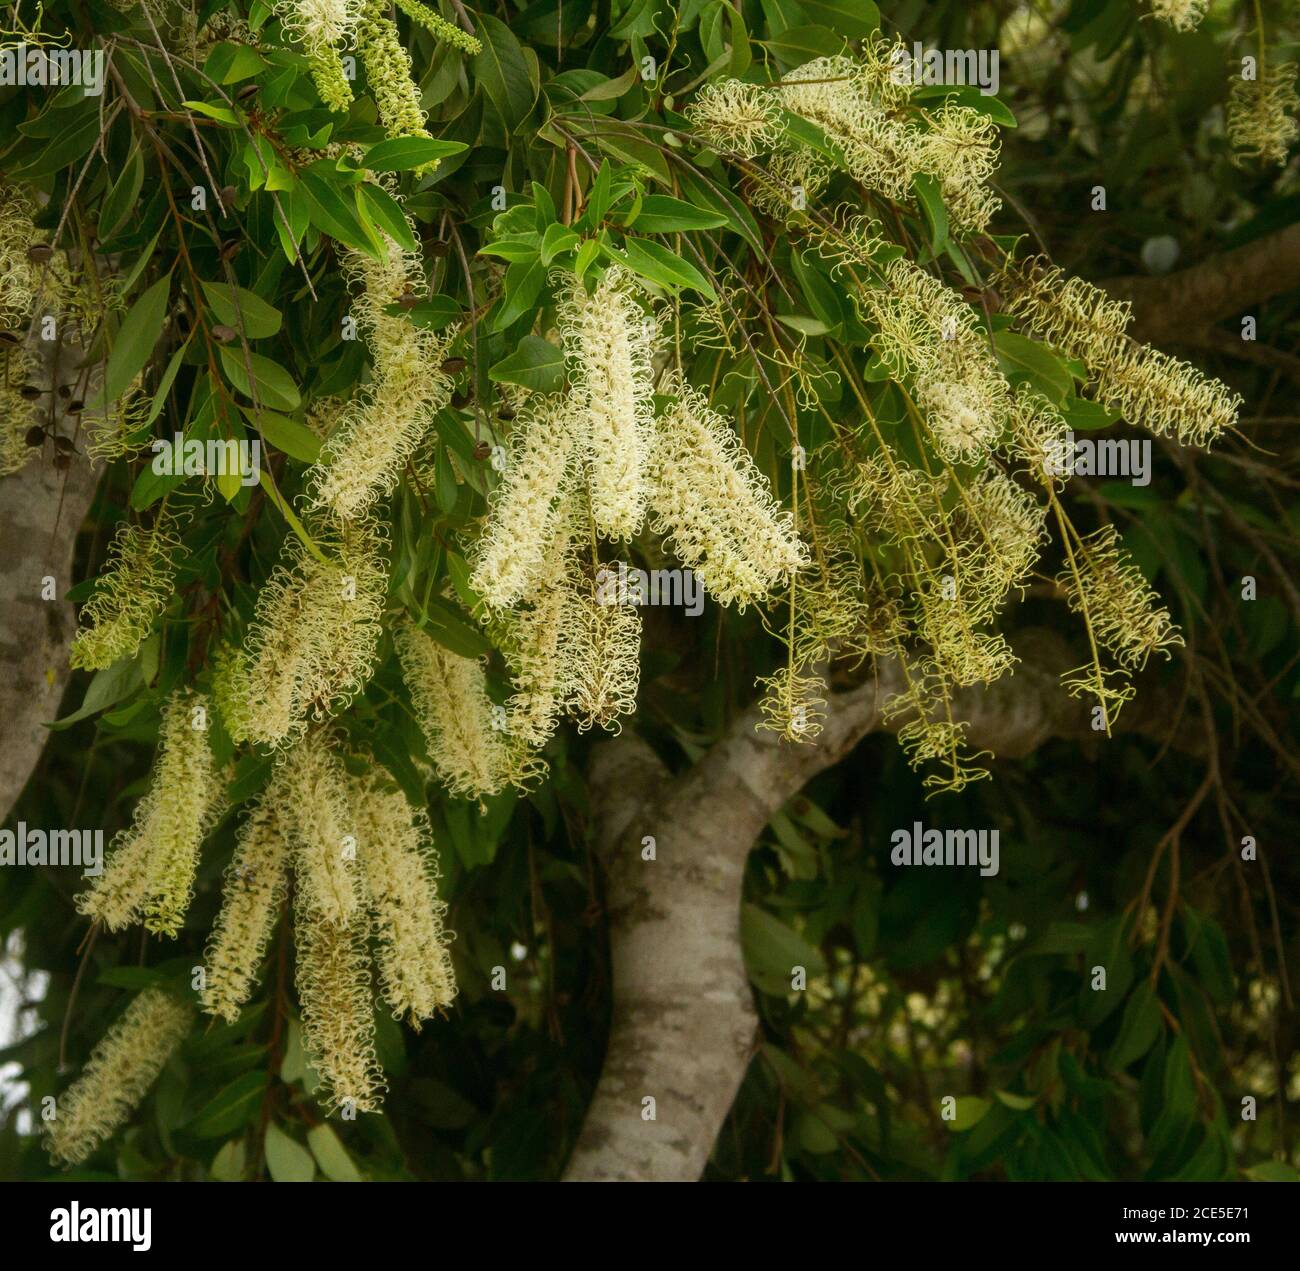 Cluster of creamy white perfumed flowers  and dark green foliage of Buckinghamia celsissima - Ivory Curl Flower, Australian native tree Stock Photo